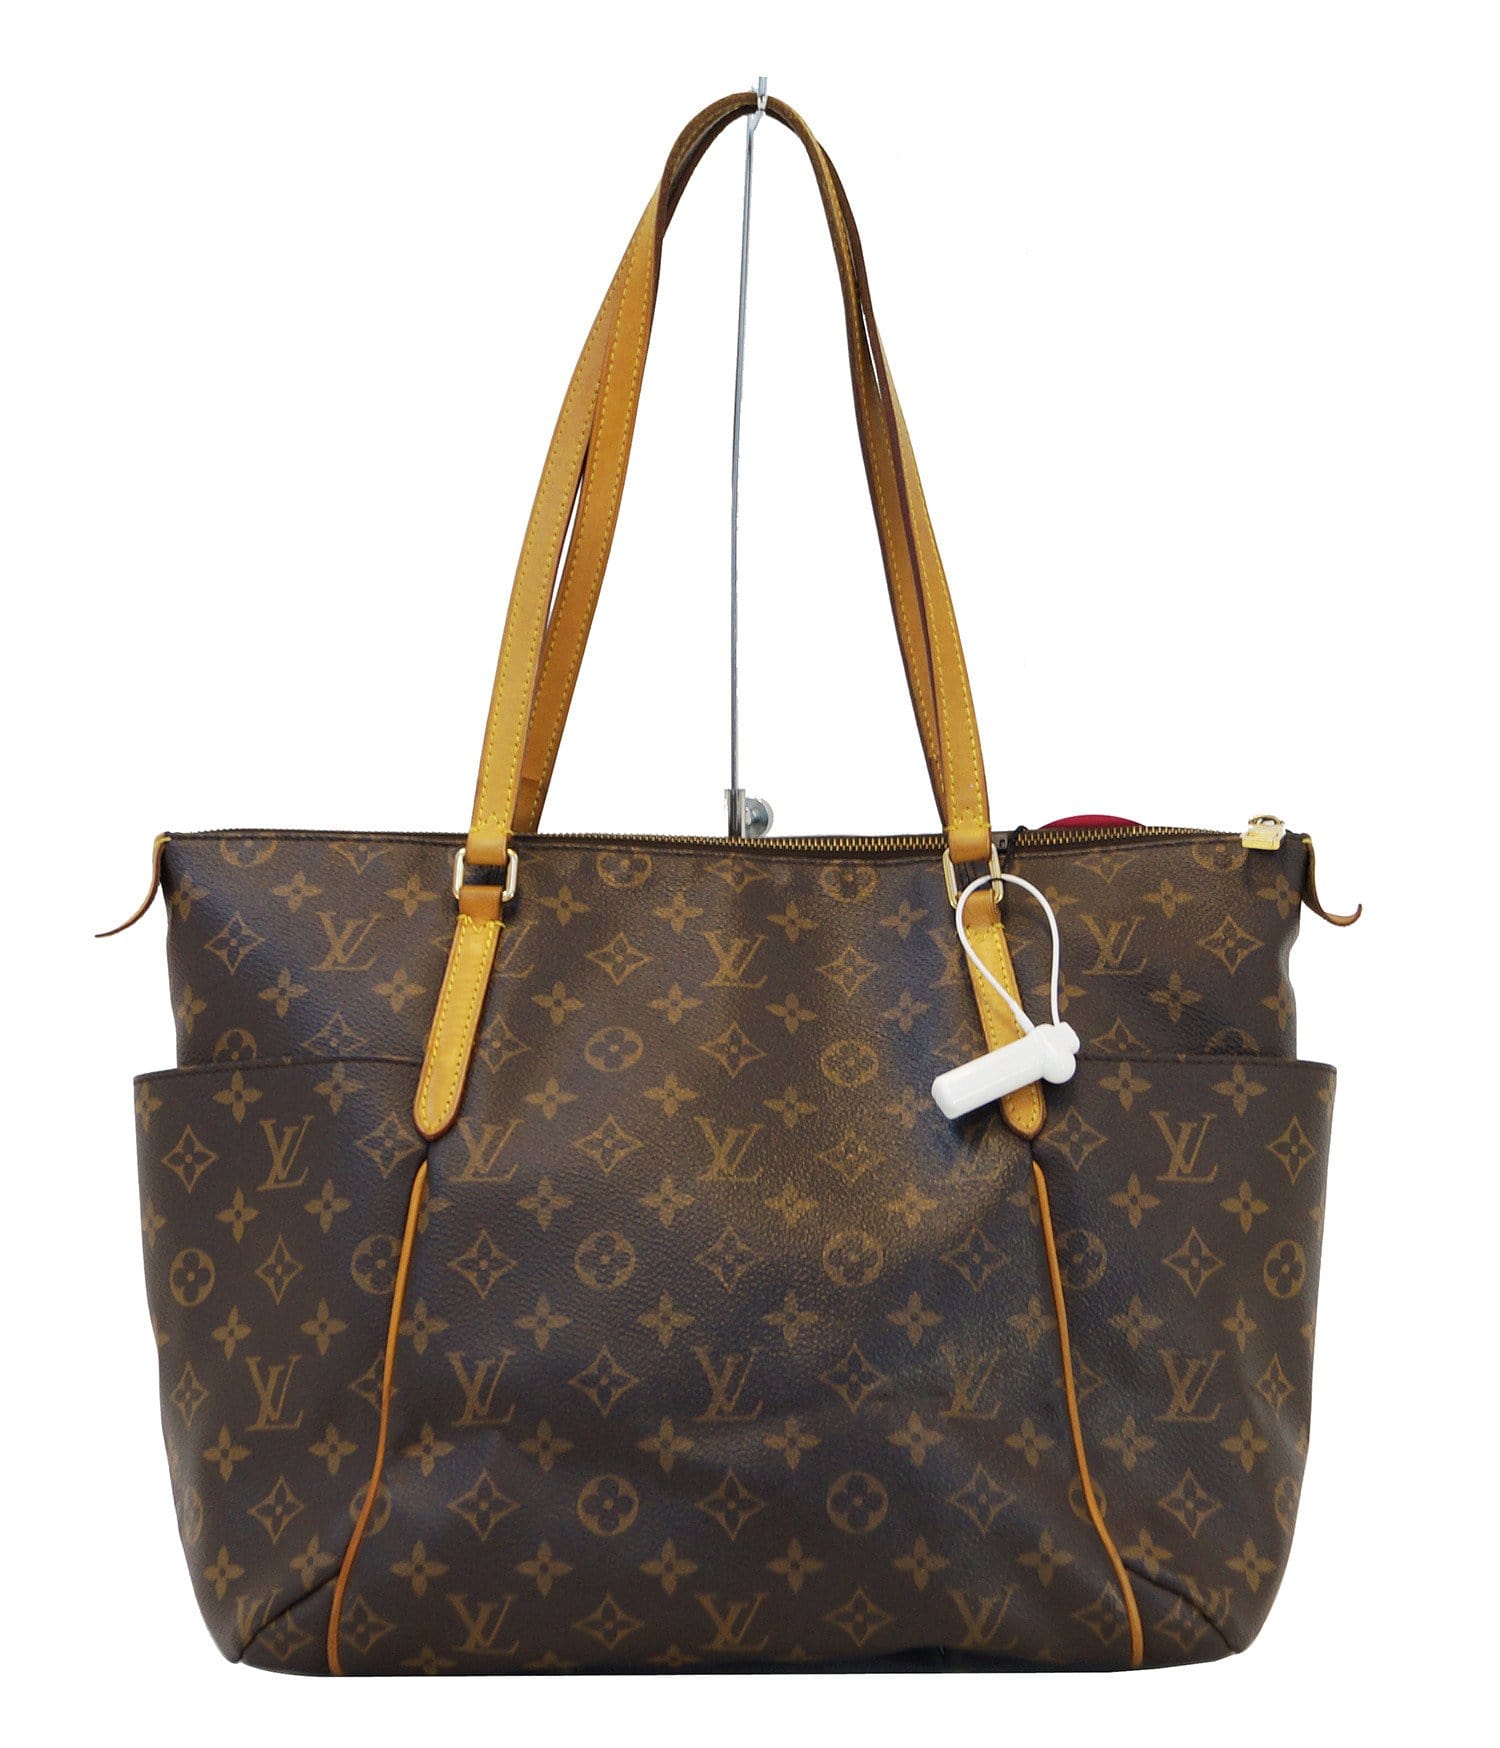 Authentic Louis Vuitton Handbags | Confederated Tribes of the Umatilla Indian Reservation